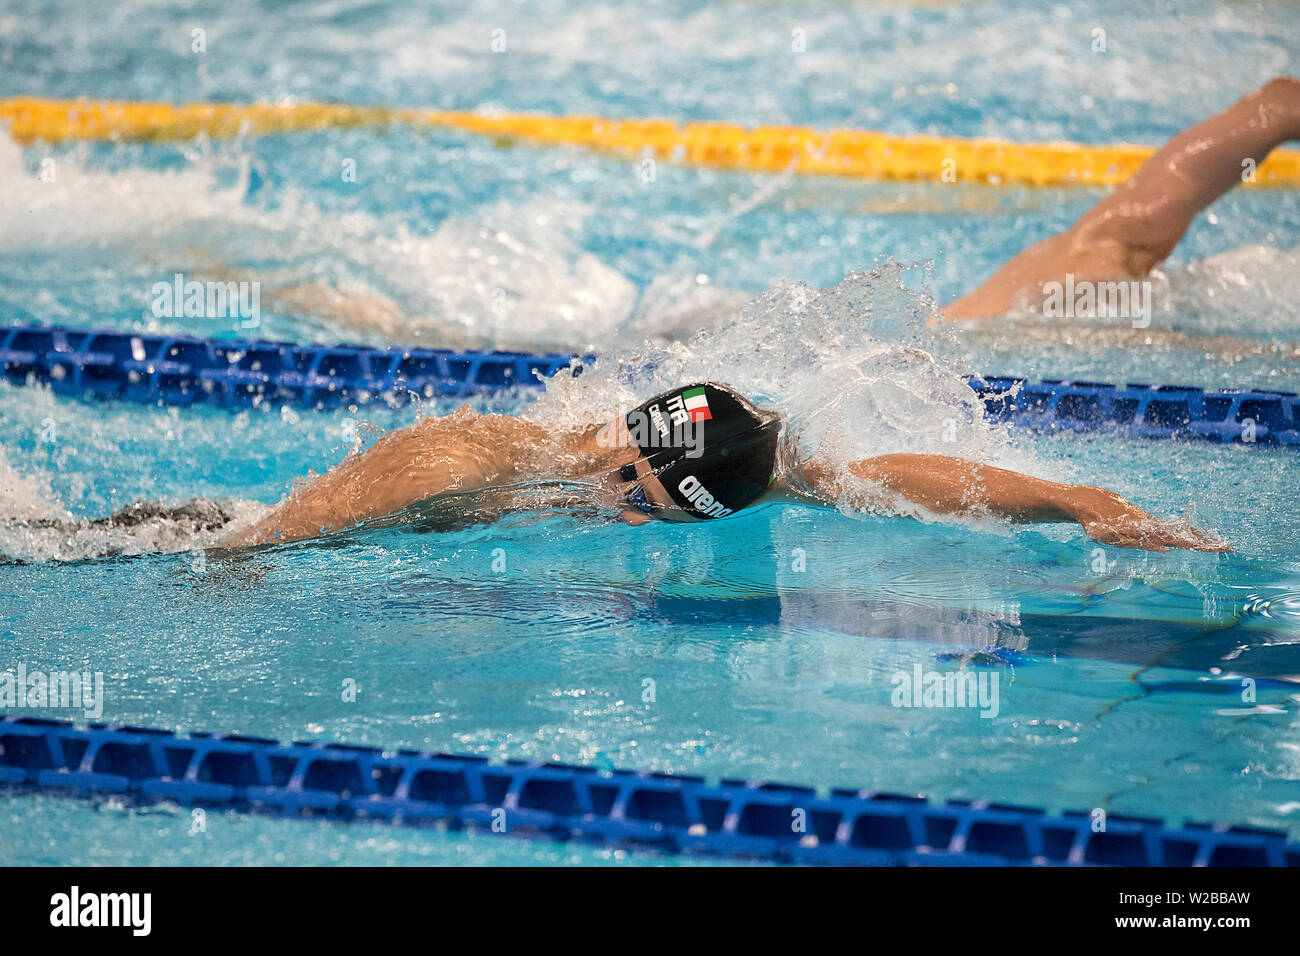 Naples, Italy. 06th July, 2019. Fourth day of Swimming at the Scandone Pool 200m Butterfly M Individual 200m, 200m Breaststroke M 100m Breaststroke, W50 Breaststroke M1500m Freestyle. Credit: Massimo Solimene/Pacific Press/Alamy Live News Stock Photo